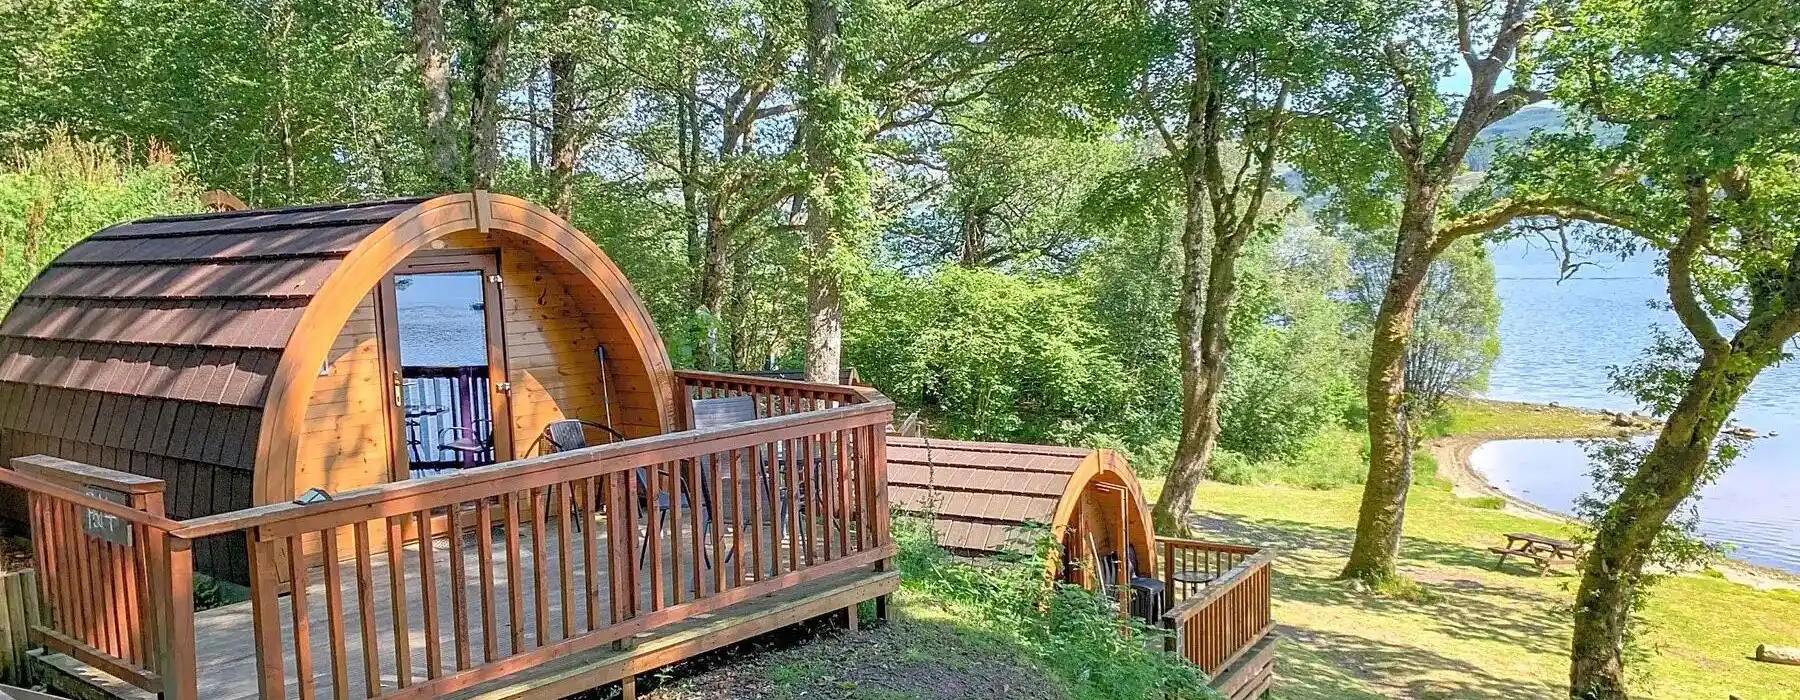 Camping and glamping pods on the West Coast of Scotland